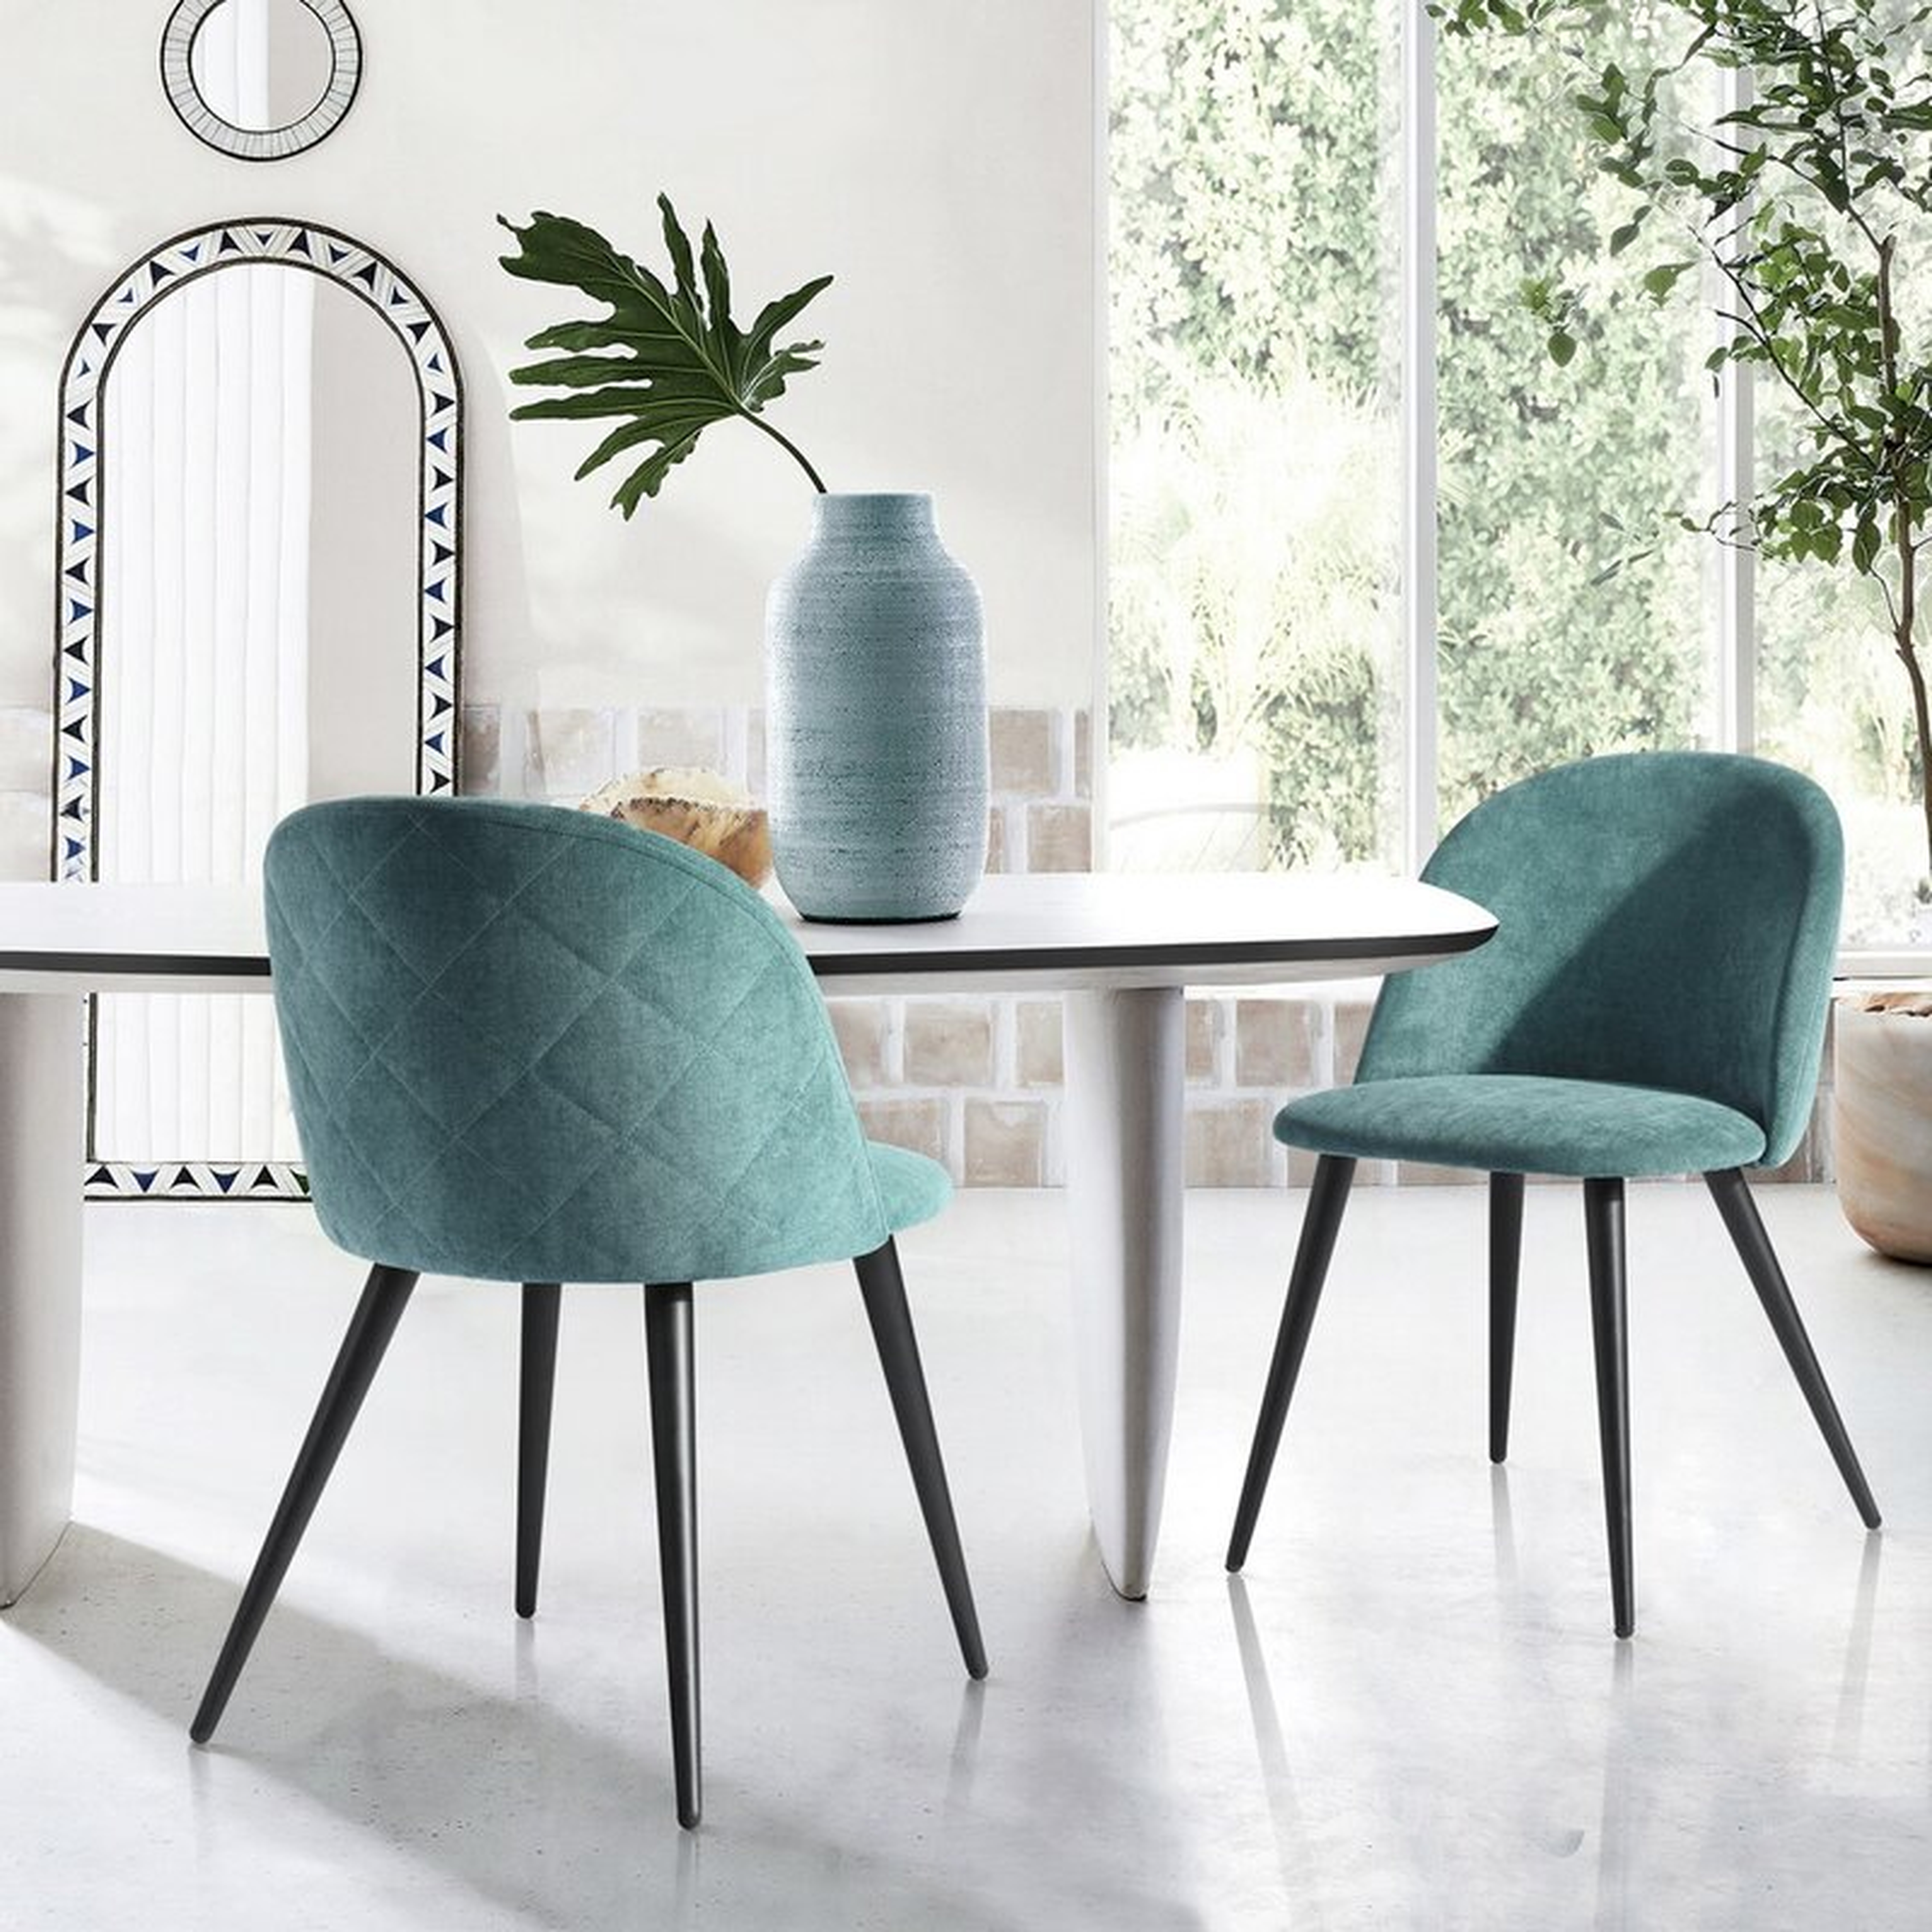 Witherspoon Upholstered Dining Chair (Set of 2) - Wayfair